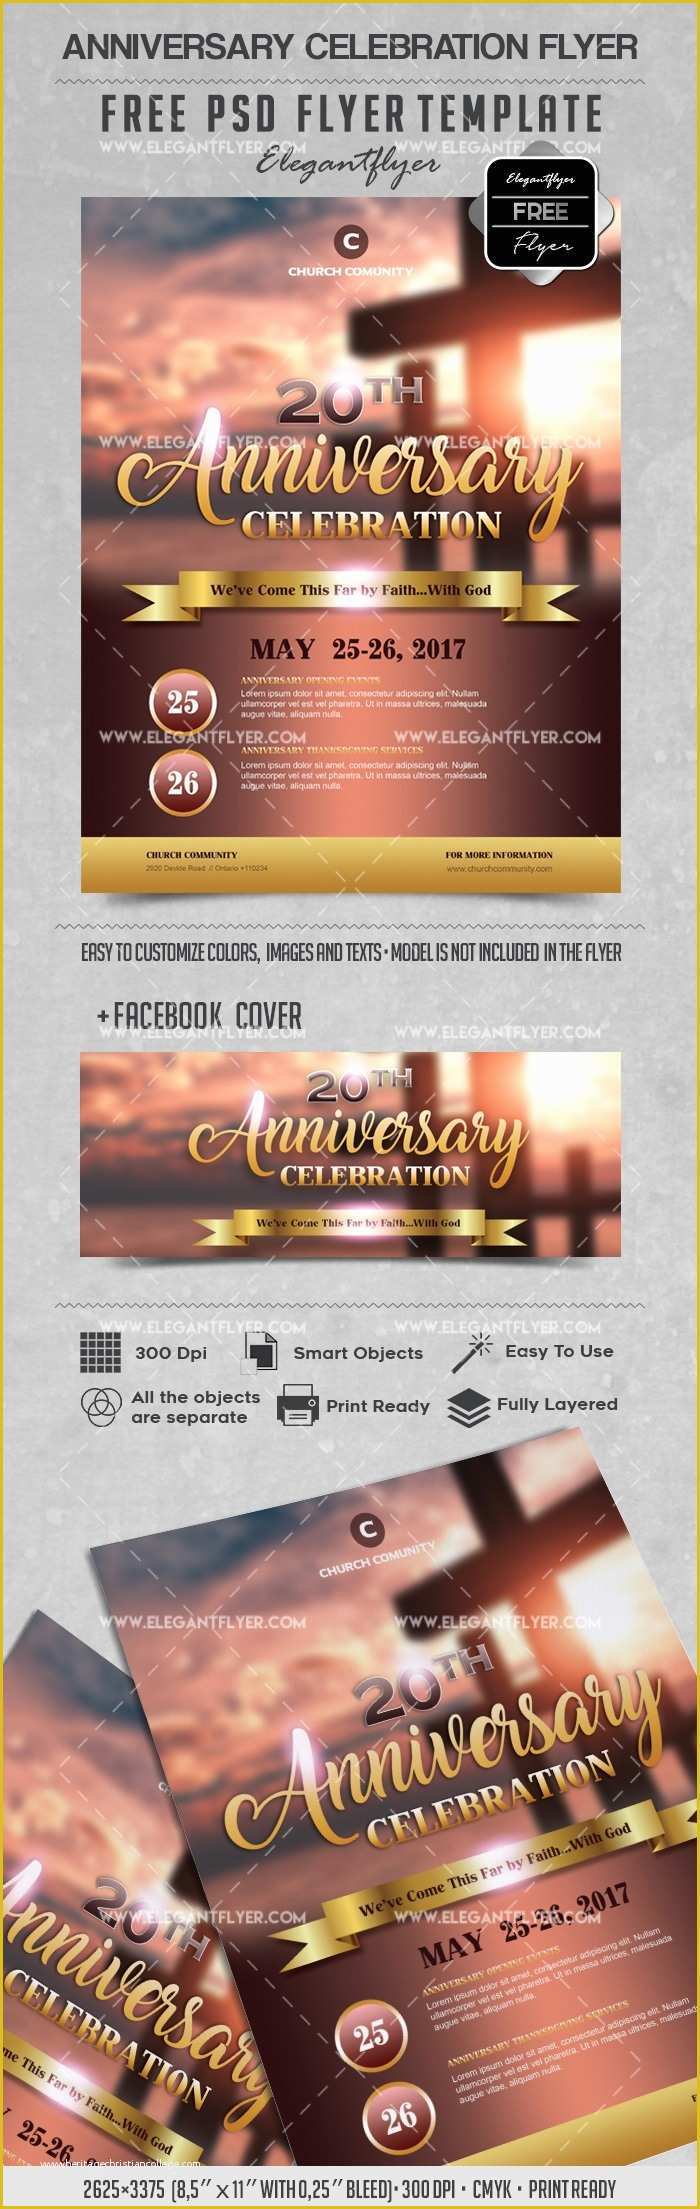 Free Funeral Flyer Template Psd Of Anniversary Celebration – Free Psd Flyers Template – by